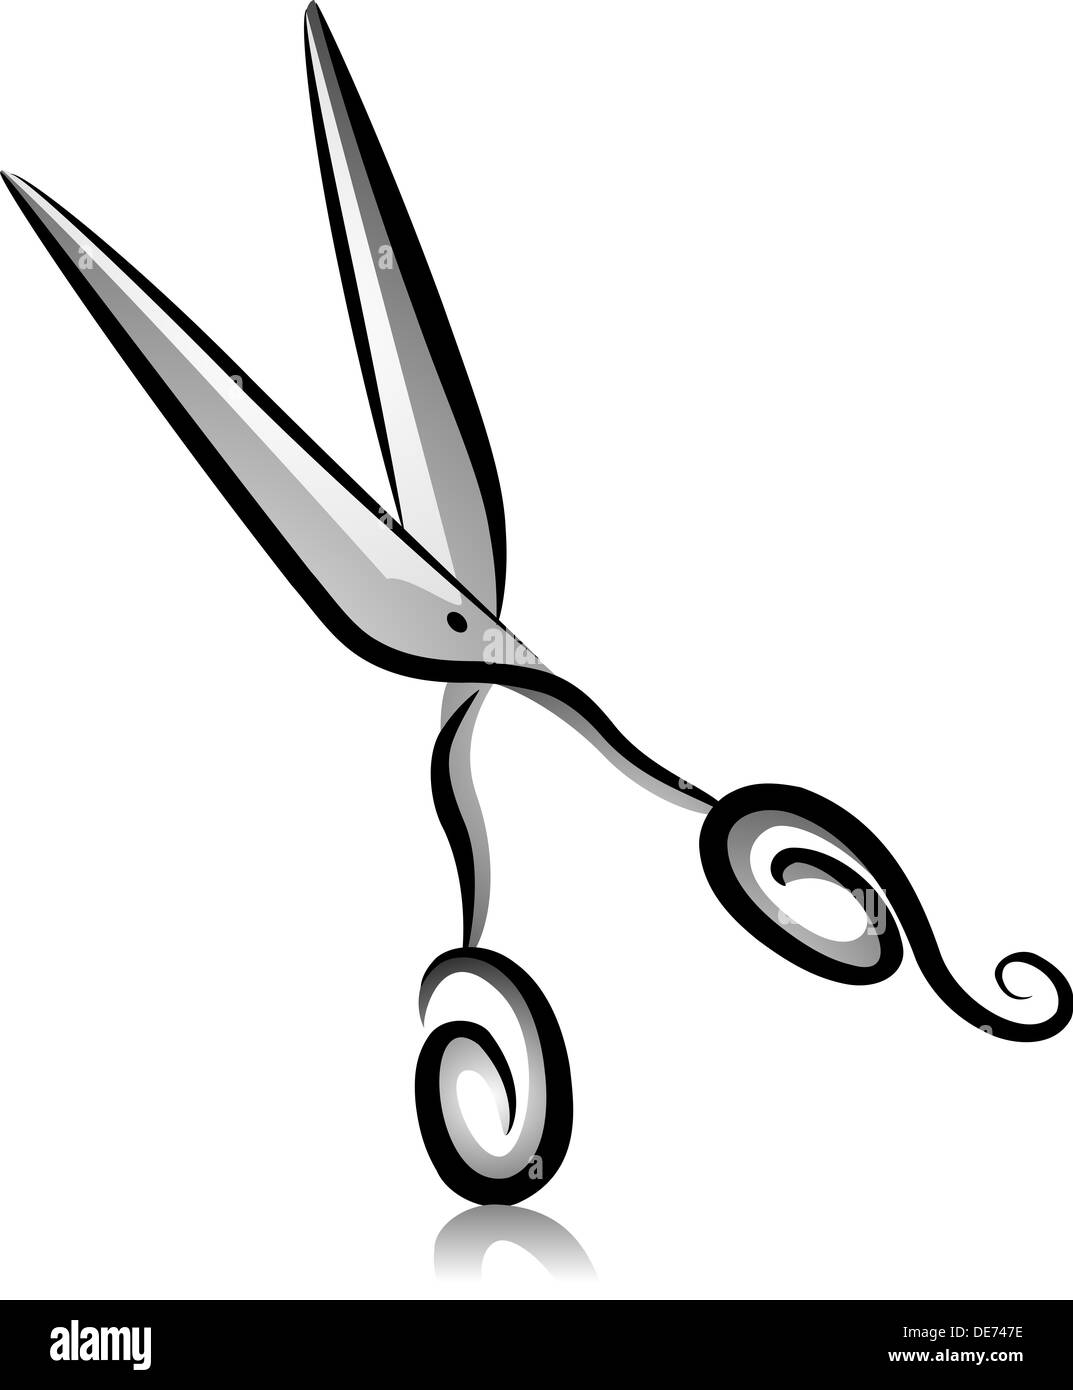 Illustration of Tailor's Scissors in Black and White Stock Photo